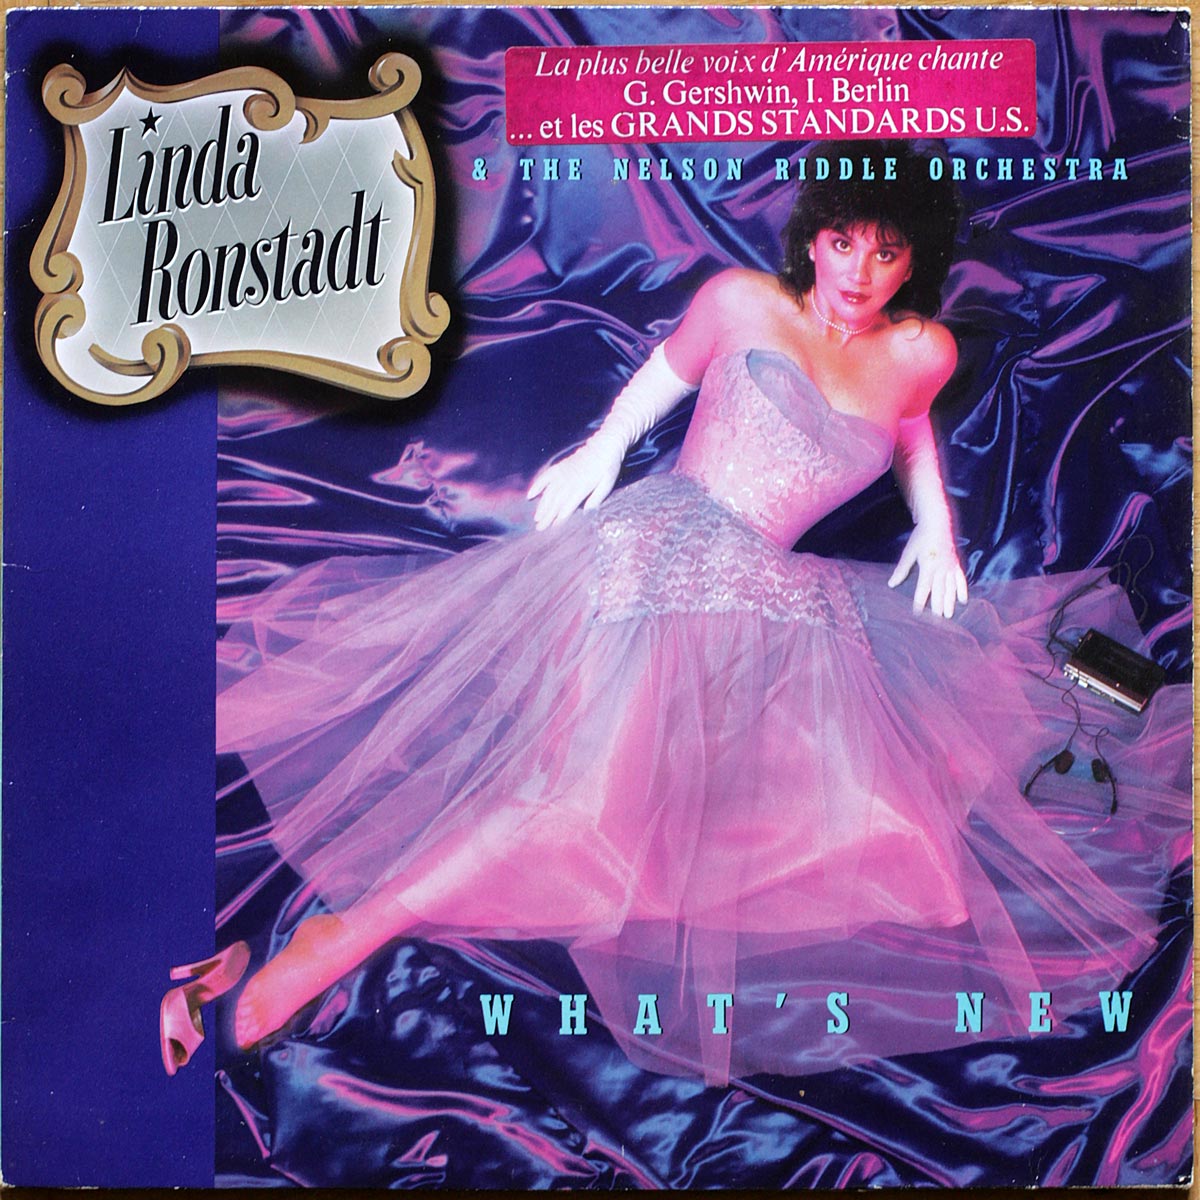 Linda Ronstadt & The Nelson Riddle Orchestra • What's new • Asylum Records 96-0260-1